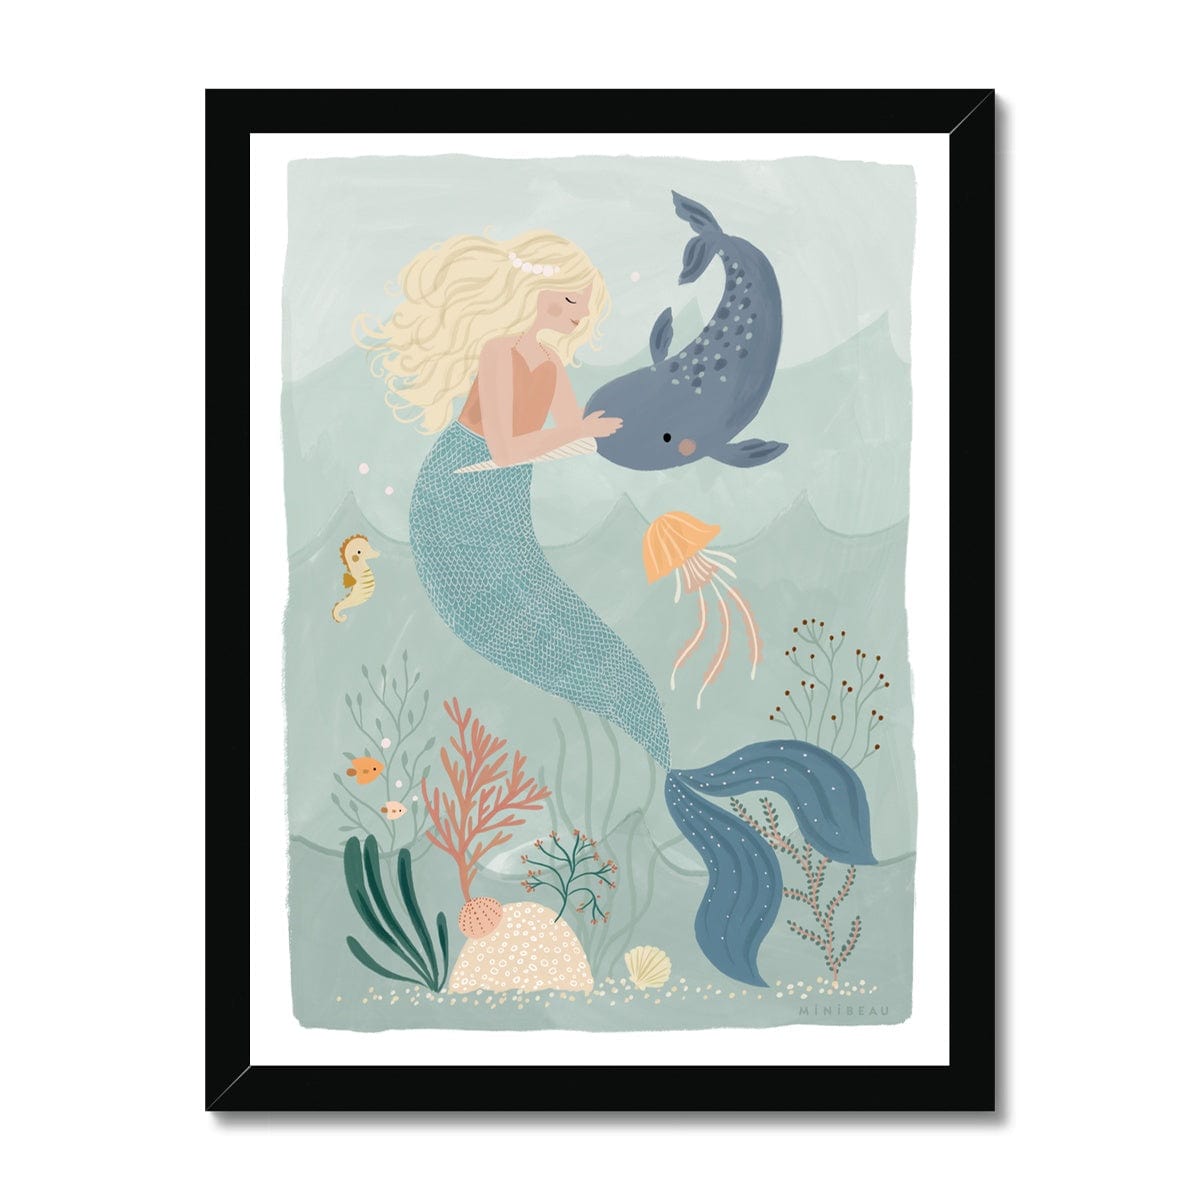 Picture of a hand-painted picture depicting Coral the Mermaid petting a Narwhal at the bottom of the sea. Coral is blonde and wearing an orange top and her tail is a deep teal. She is wearing a pearl headband. In the background are 2 small angel fish, a sea horse and a jellyfish amongst sea foliage, with a white border in a black wooden frame